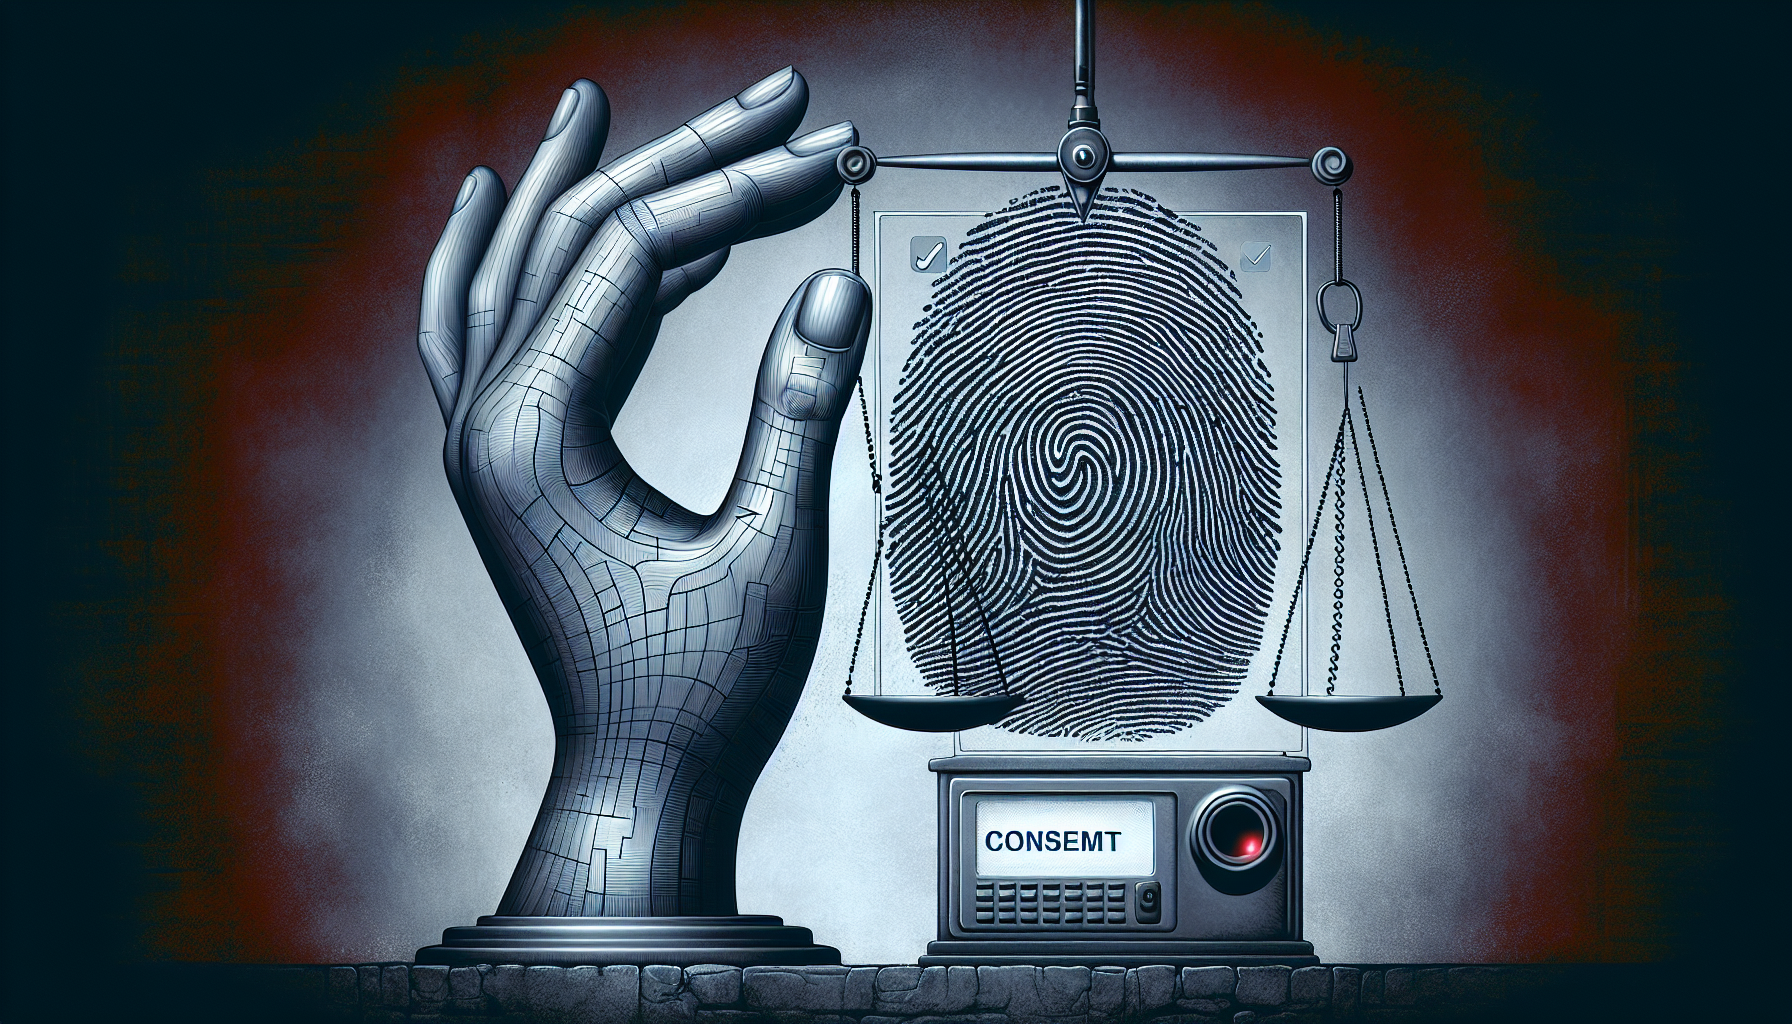 Illustration of privacy and consent in fingerprinting